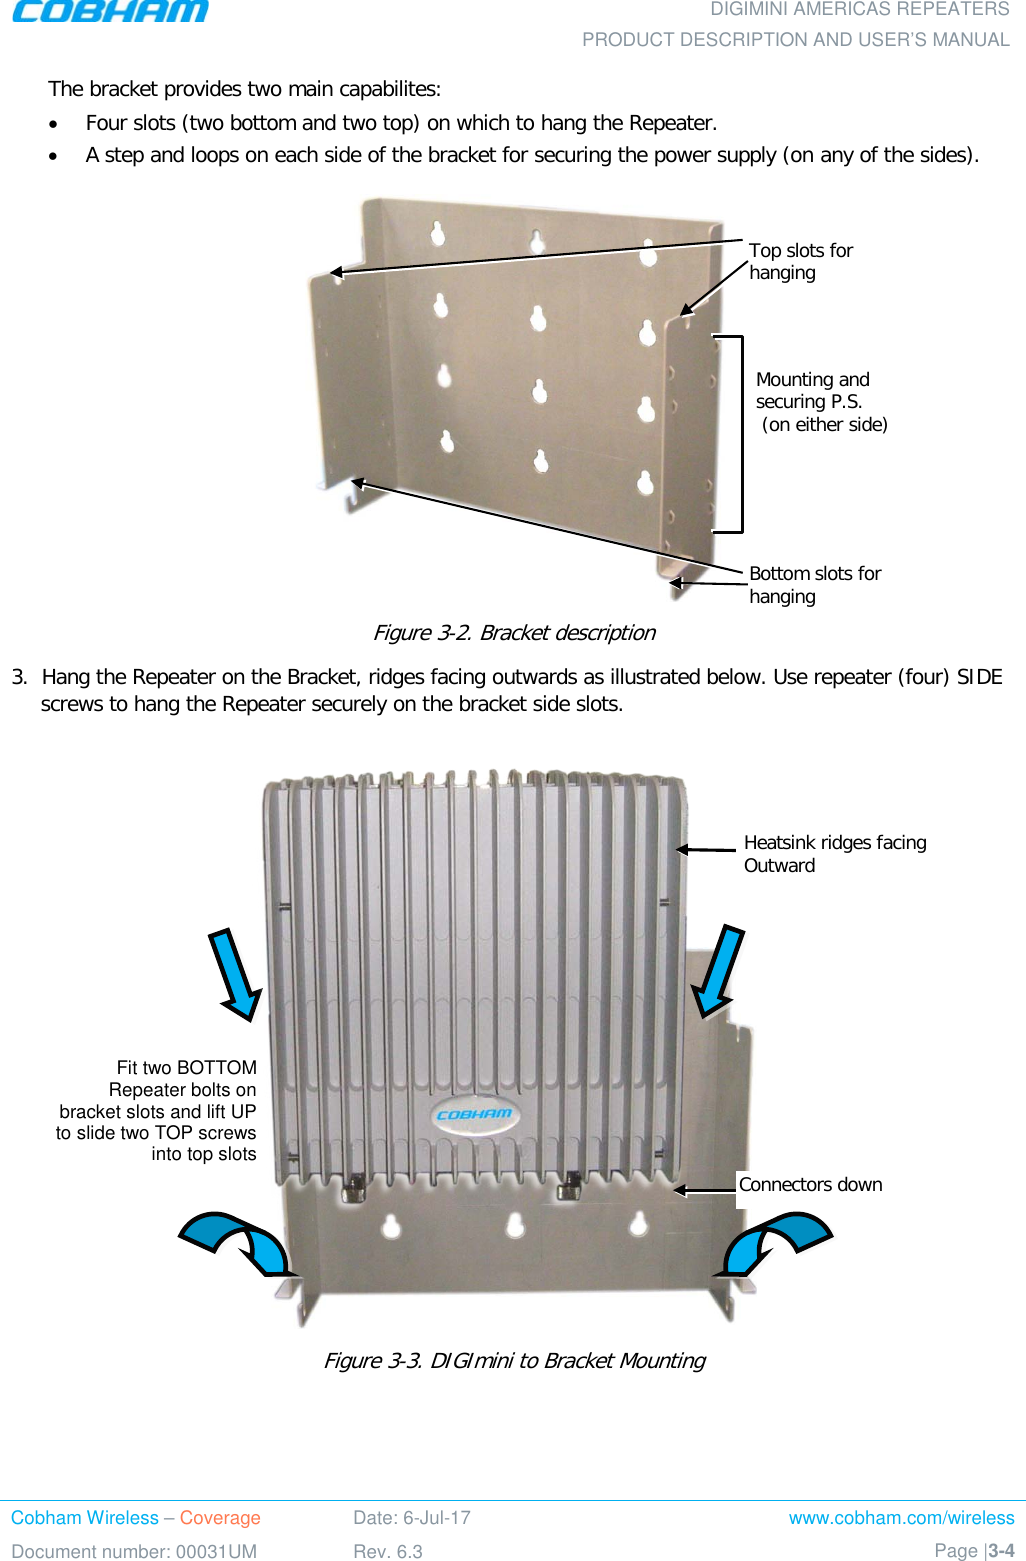  DIGIMINI AMERICAS REPEATERS PRODUCT DESCRIPTION AND USER’S MANUAL Cobham Wireless – Coverage Date: 6-Jul-17 www.cobham.com/wireless Document number: 00031UM Rev. 6.3 Page |3-4  The bracket provides two main capabilites:  • Four slots (two bottom and two top) on which to hang the Repeater. • A step and loops on each side of the bracket for securing the power supply (on any of the sides).  Figure  3-2. Bracket description 3.  Hang the Repeater on the Bracket, ridges facing outwards as illustrated below. Use repeater (four) SIDE screws to hang the Repeater securely on the bracket side slots.        Figure  3-3. DIGImini to Bracket Mounting   Connectors down Top slots for hanging  Bottom slots for hanging Mounting and securing P.S.  (on either side)  Heatsink ridges facing Outward  Fit two BOTTOM Repeater bolts on bracket slots and lift UP to slide two TOP screws into top slots 